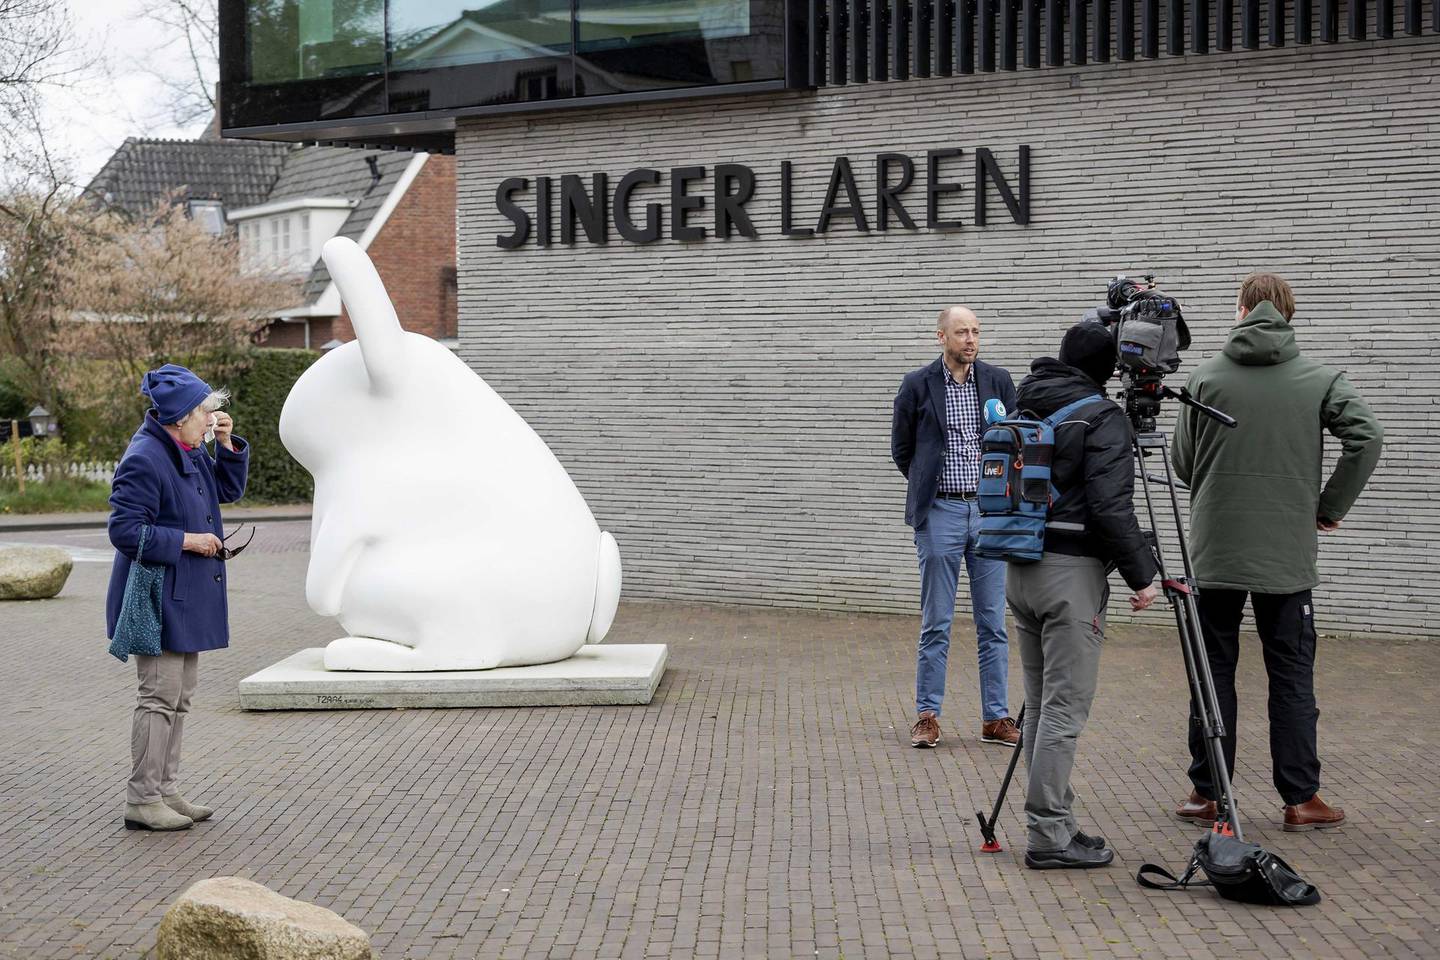 epa08332148 Evert van Os (3-R), director of the Singer Laren museum, speaks to the media in front of the museum in Laren, The Netherlands, 30 March 2020, after a painting by Vincent van Gogh was stolen from the Singer Laren museum. The canvas paining 'Spring Garden, the rectory garden in Nuenen in the spring of 1884' was stolen overnight Monday 30 March 2020.  EPA/ROBIN VAN LONKHUIJSEN